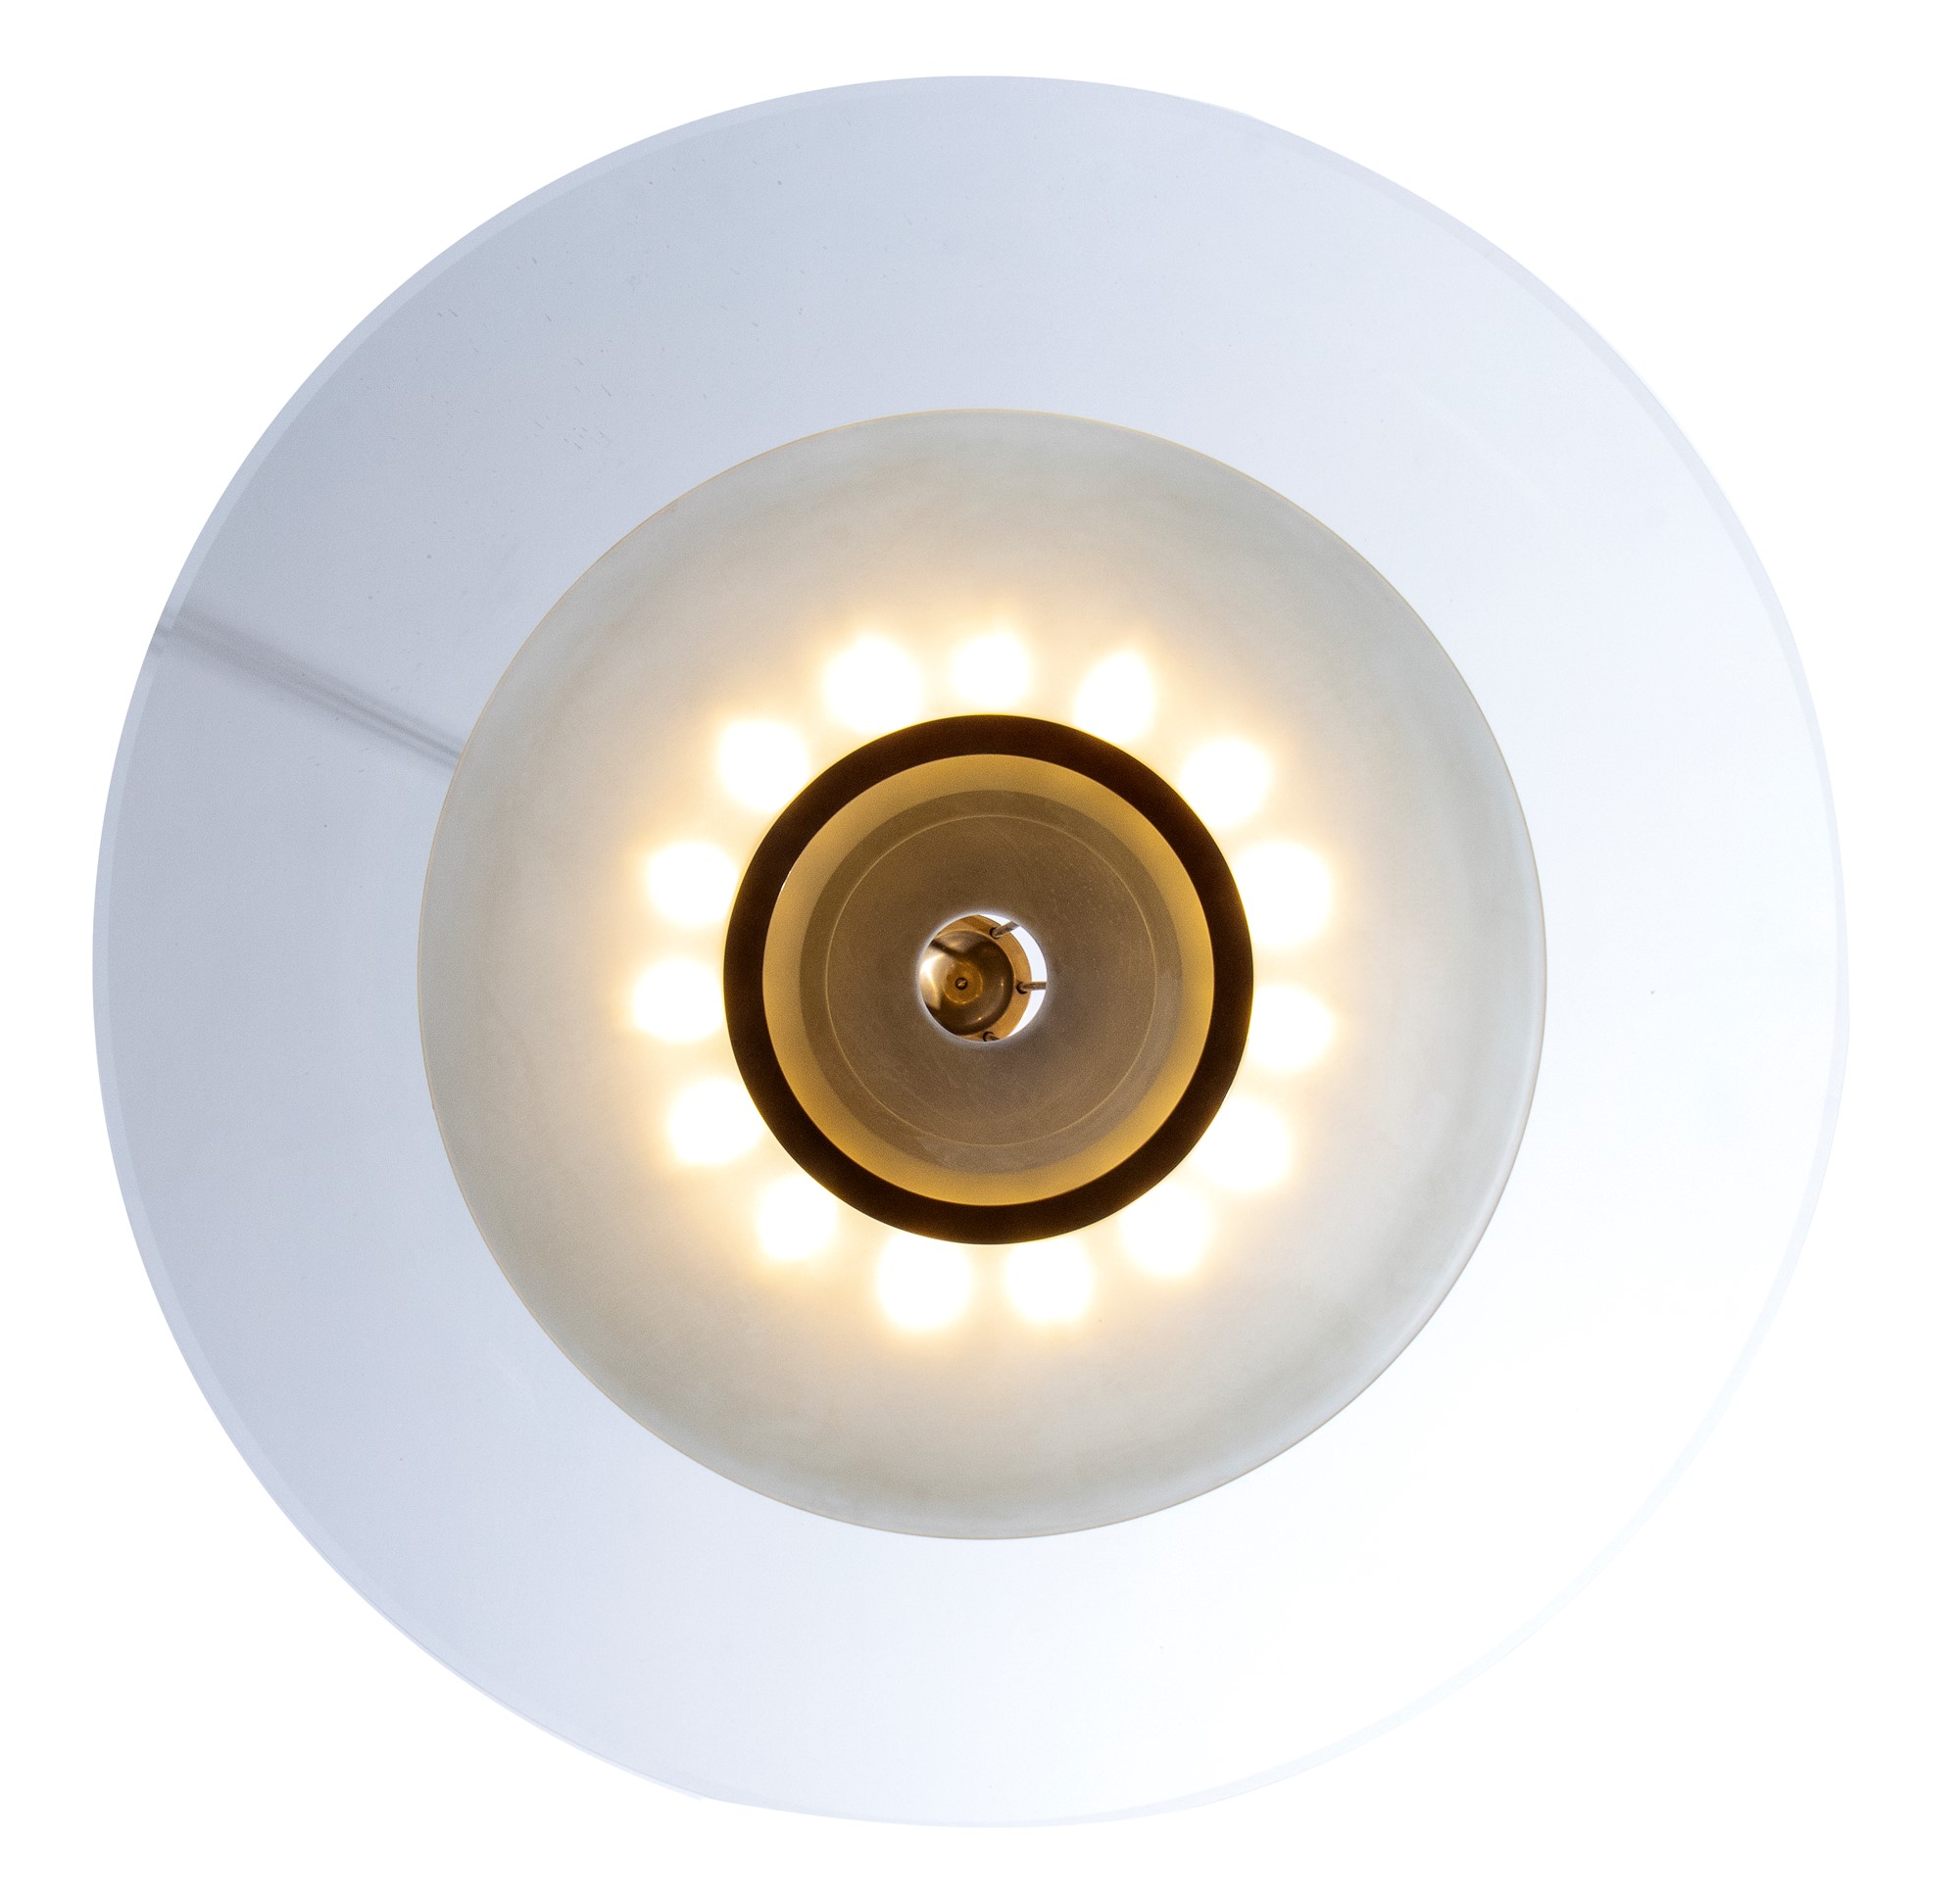 Max Ingrand Ceiling lamp mod. 1498 with brass structure, satin glass screen and crystal cup - Image 13 of 19